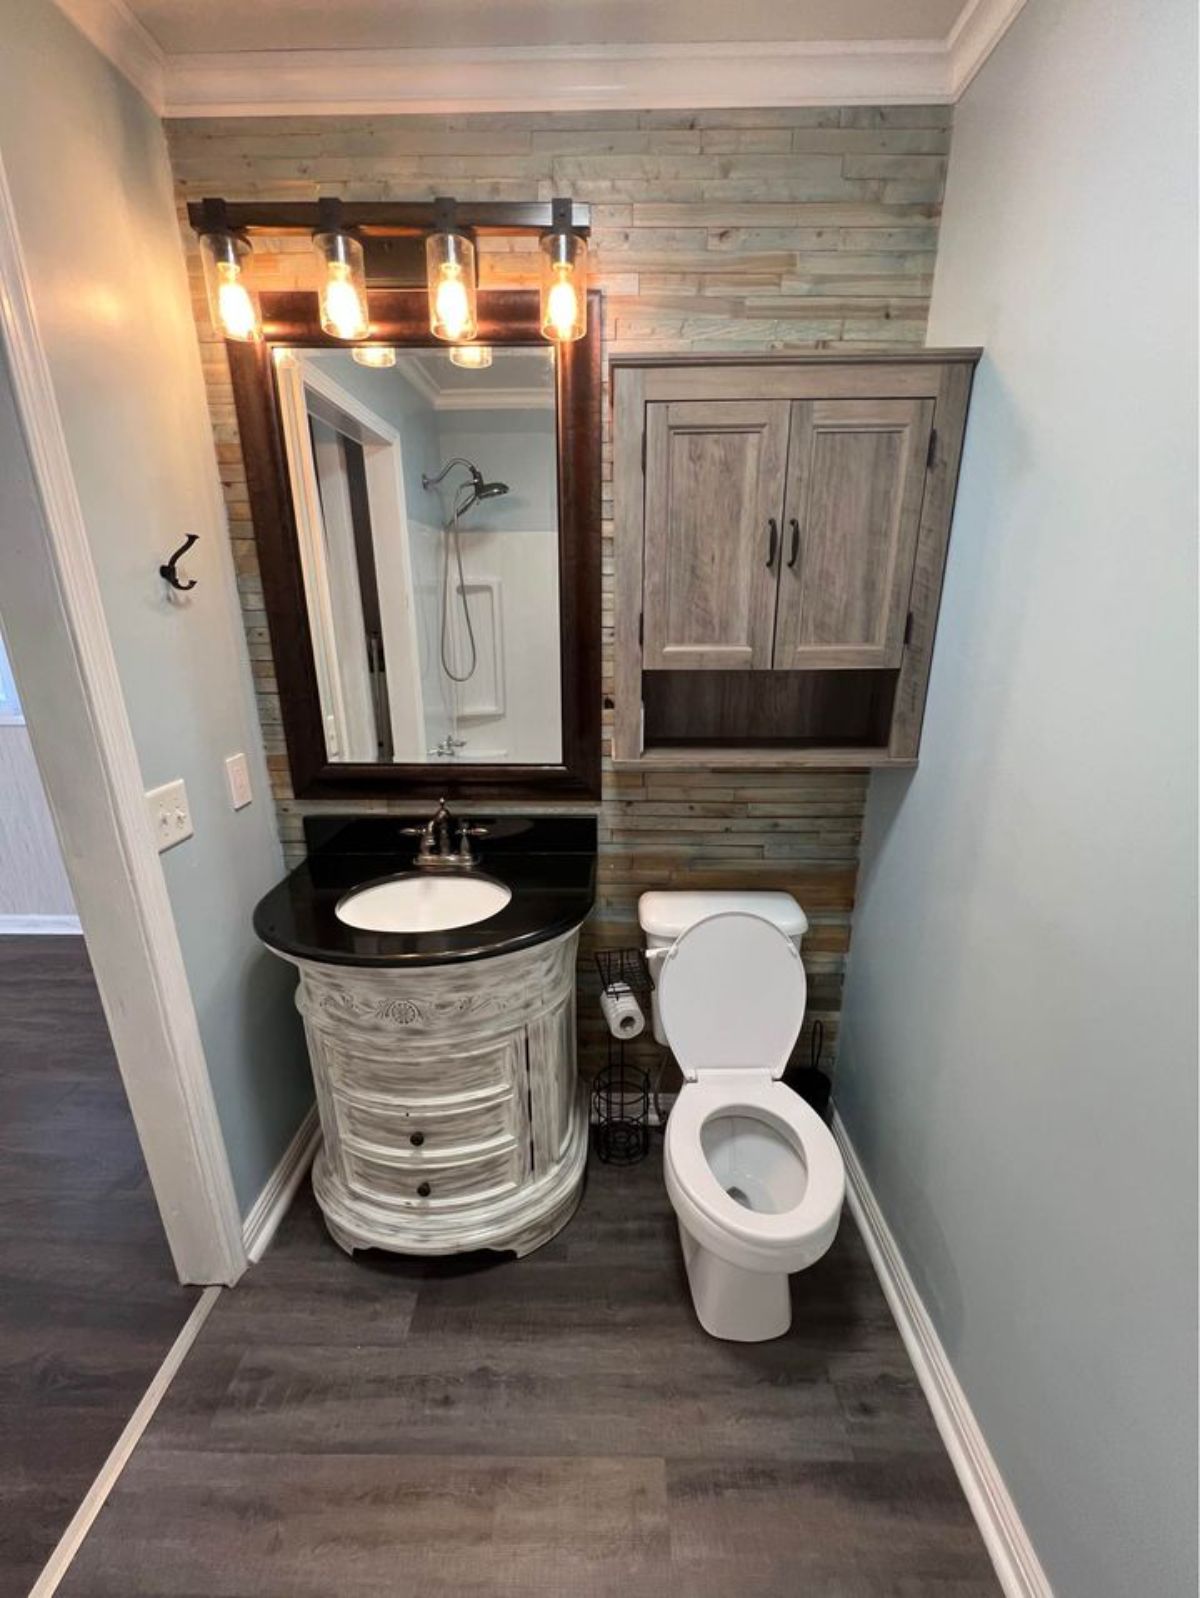 Toilet and sink of 1 Bedroom Barn-Style Tiny House